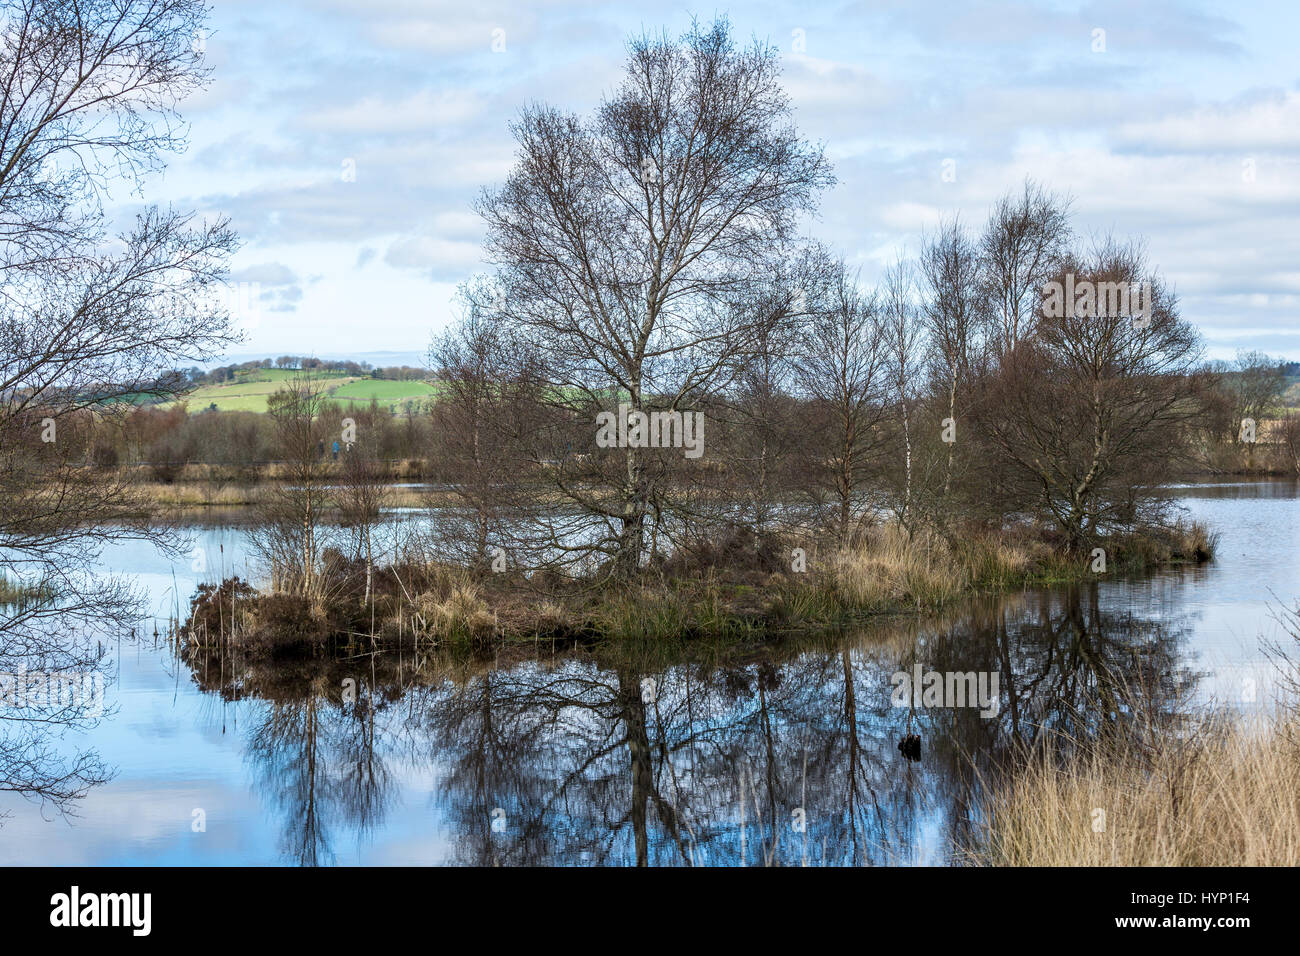 Cors Caron National Nature Reserve near Tregaron in Mid Wales. The site comprises three raised bogs built up from deep layers of peat that have taken around 12,000 years to form. Credit: Ian Jones/Alamy Live News Stock Photo